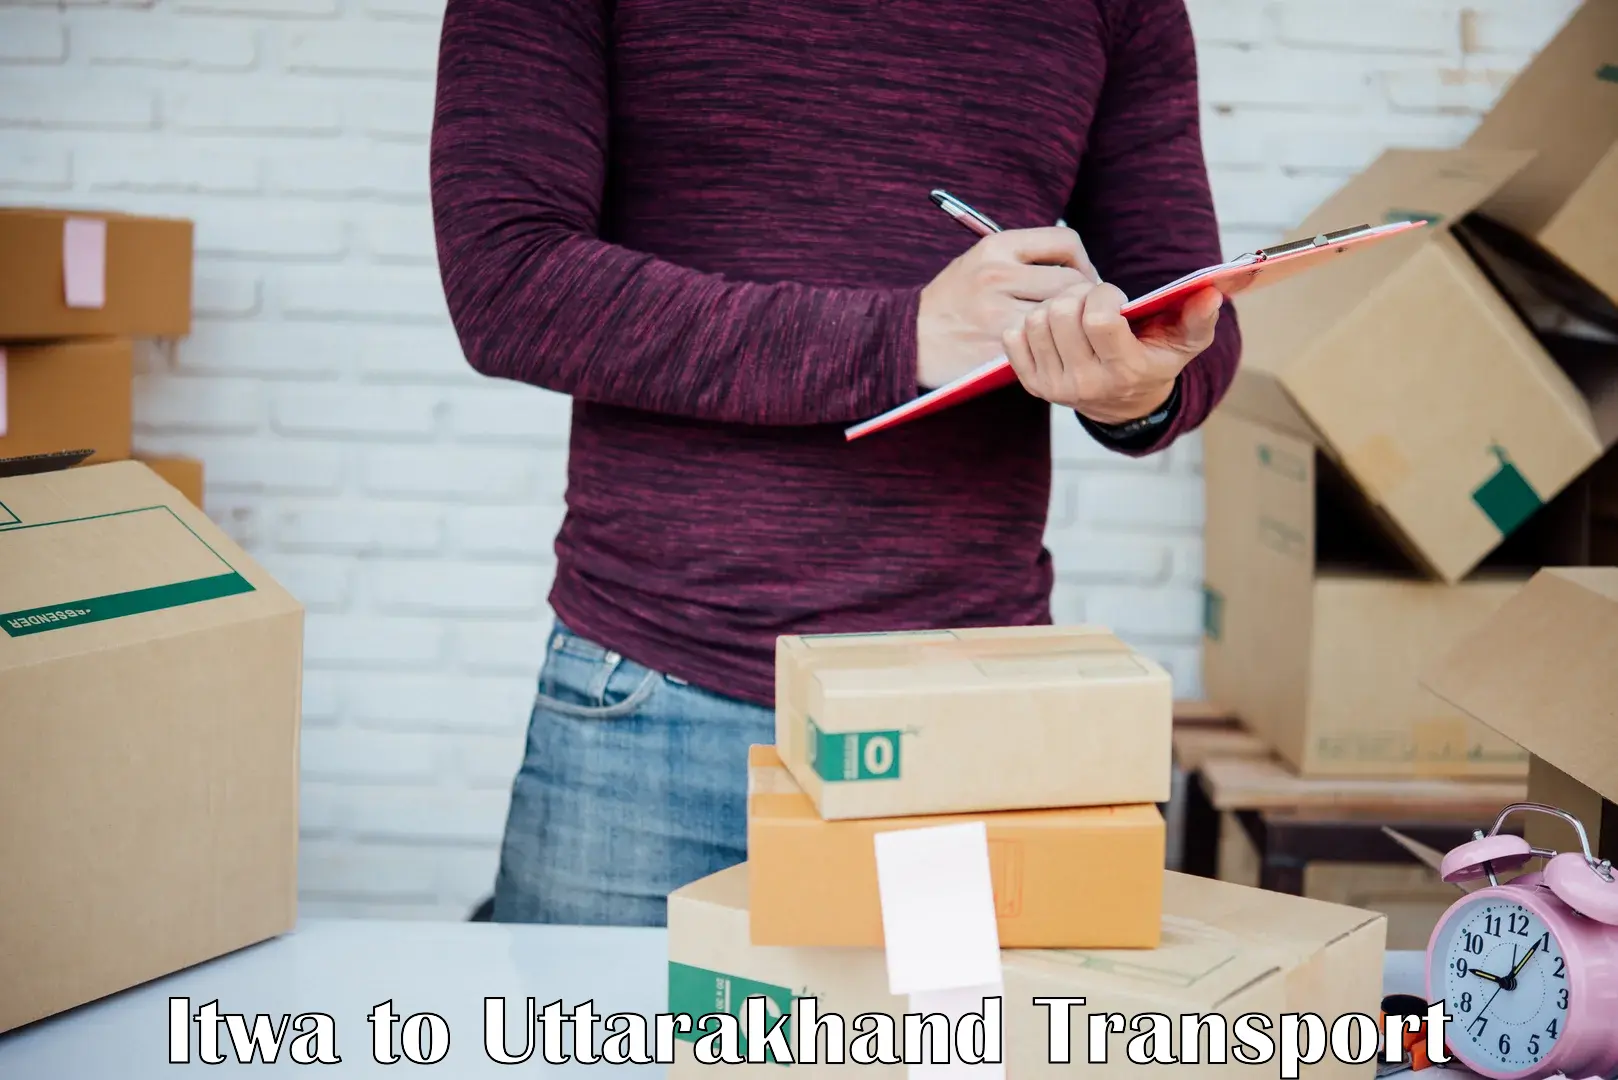 Goods delivery service Itwa to Rishikesh